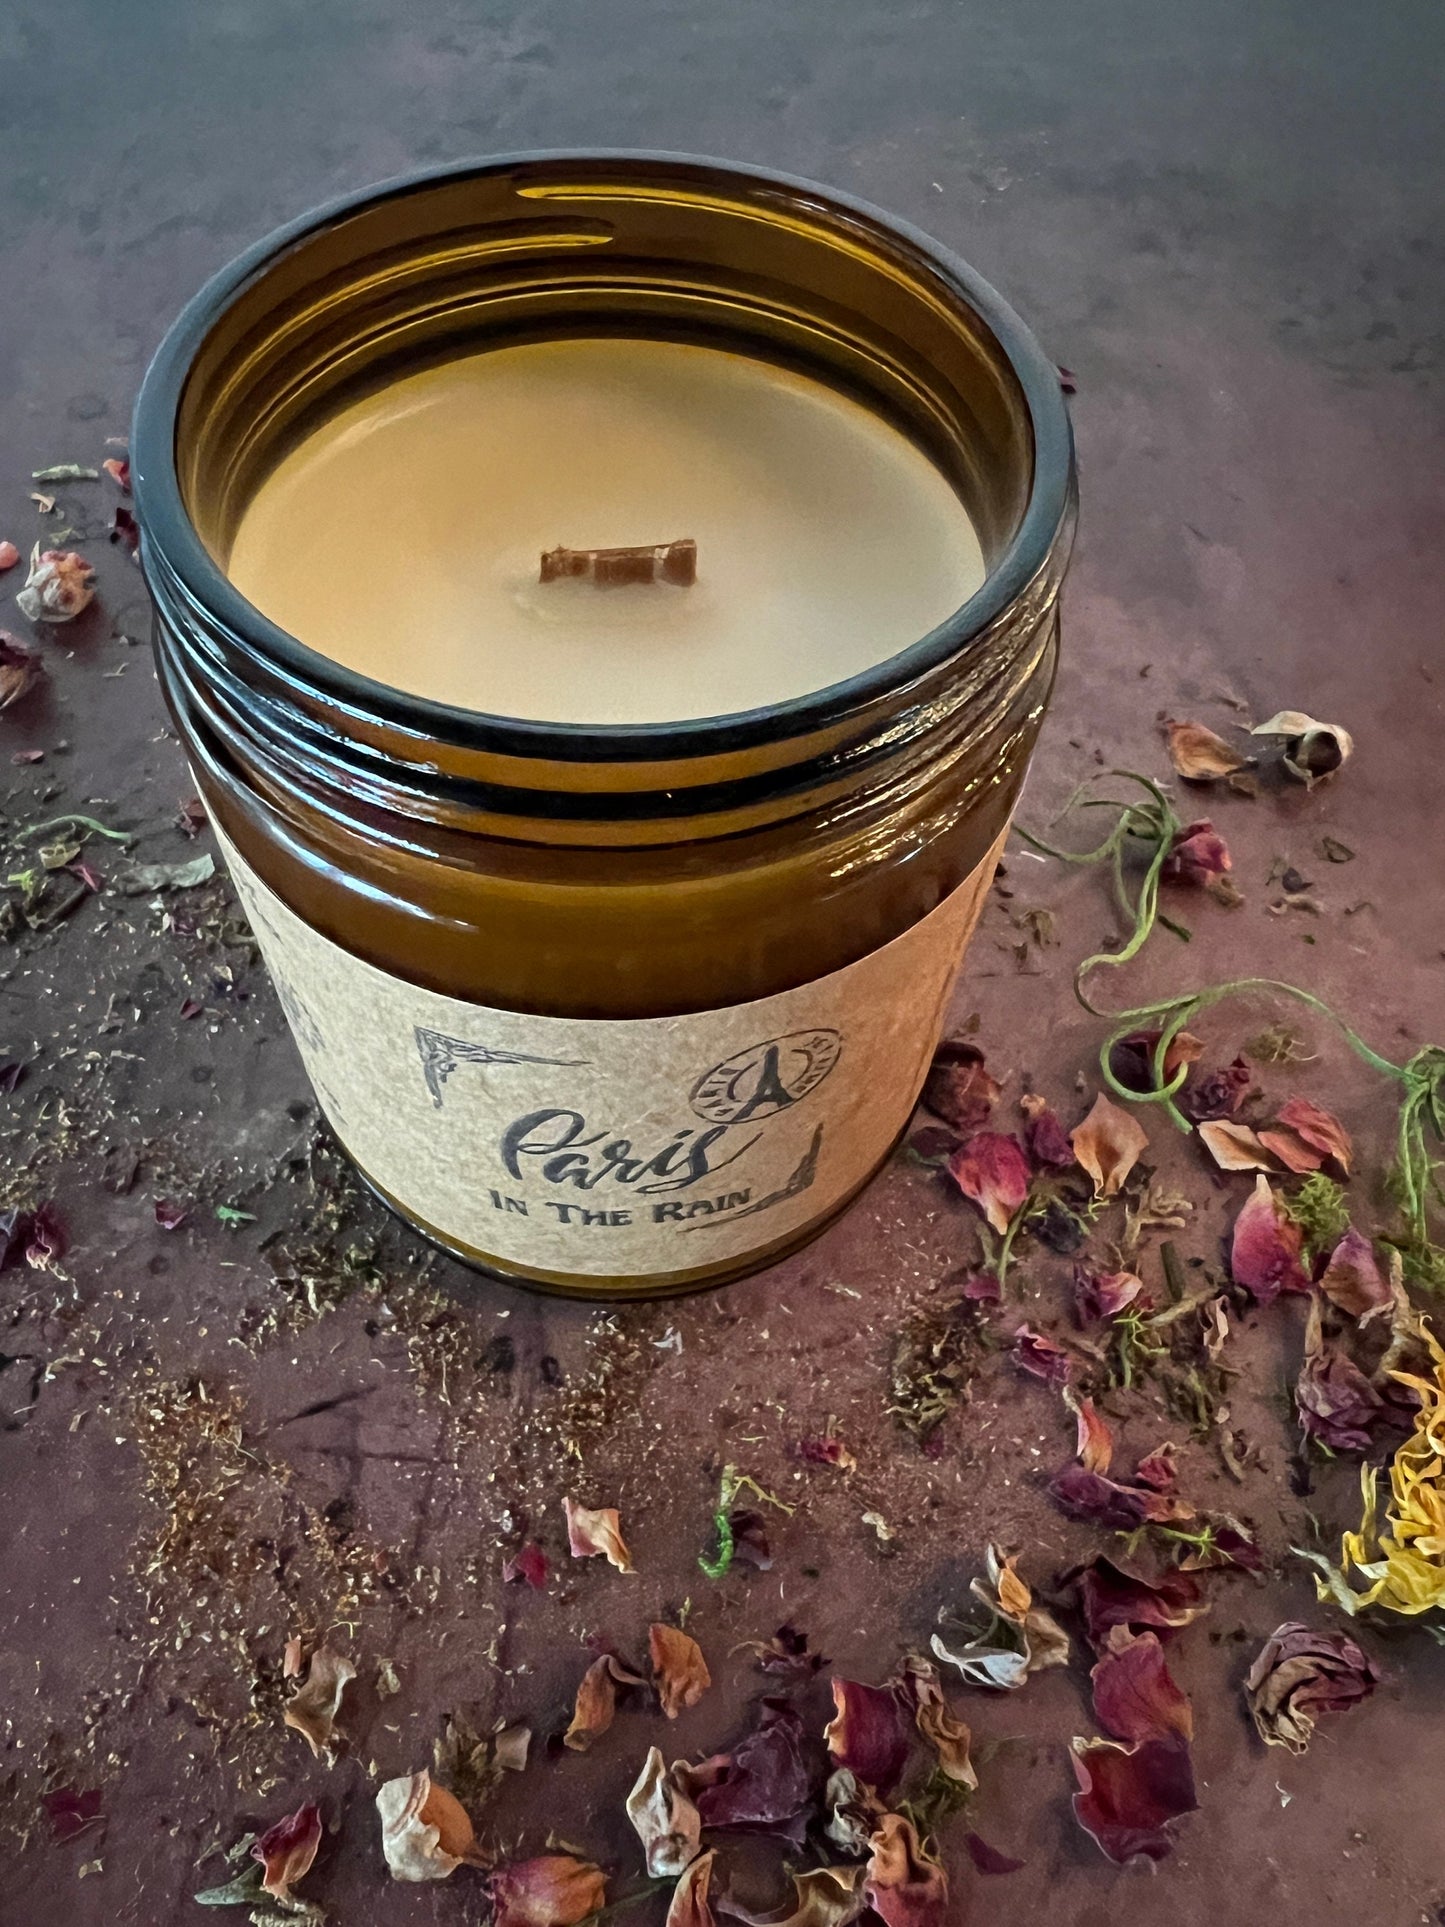 Paris In The Rain, Wooden Wick, Soy Wax Candle